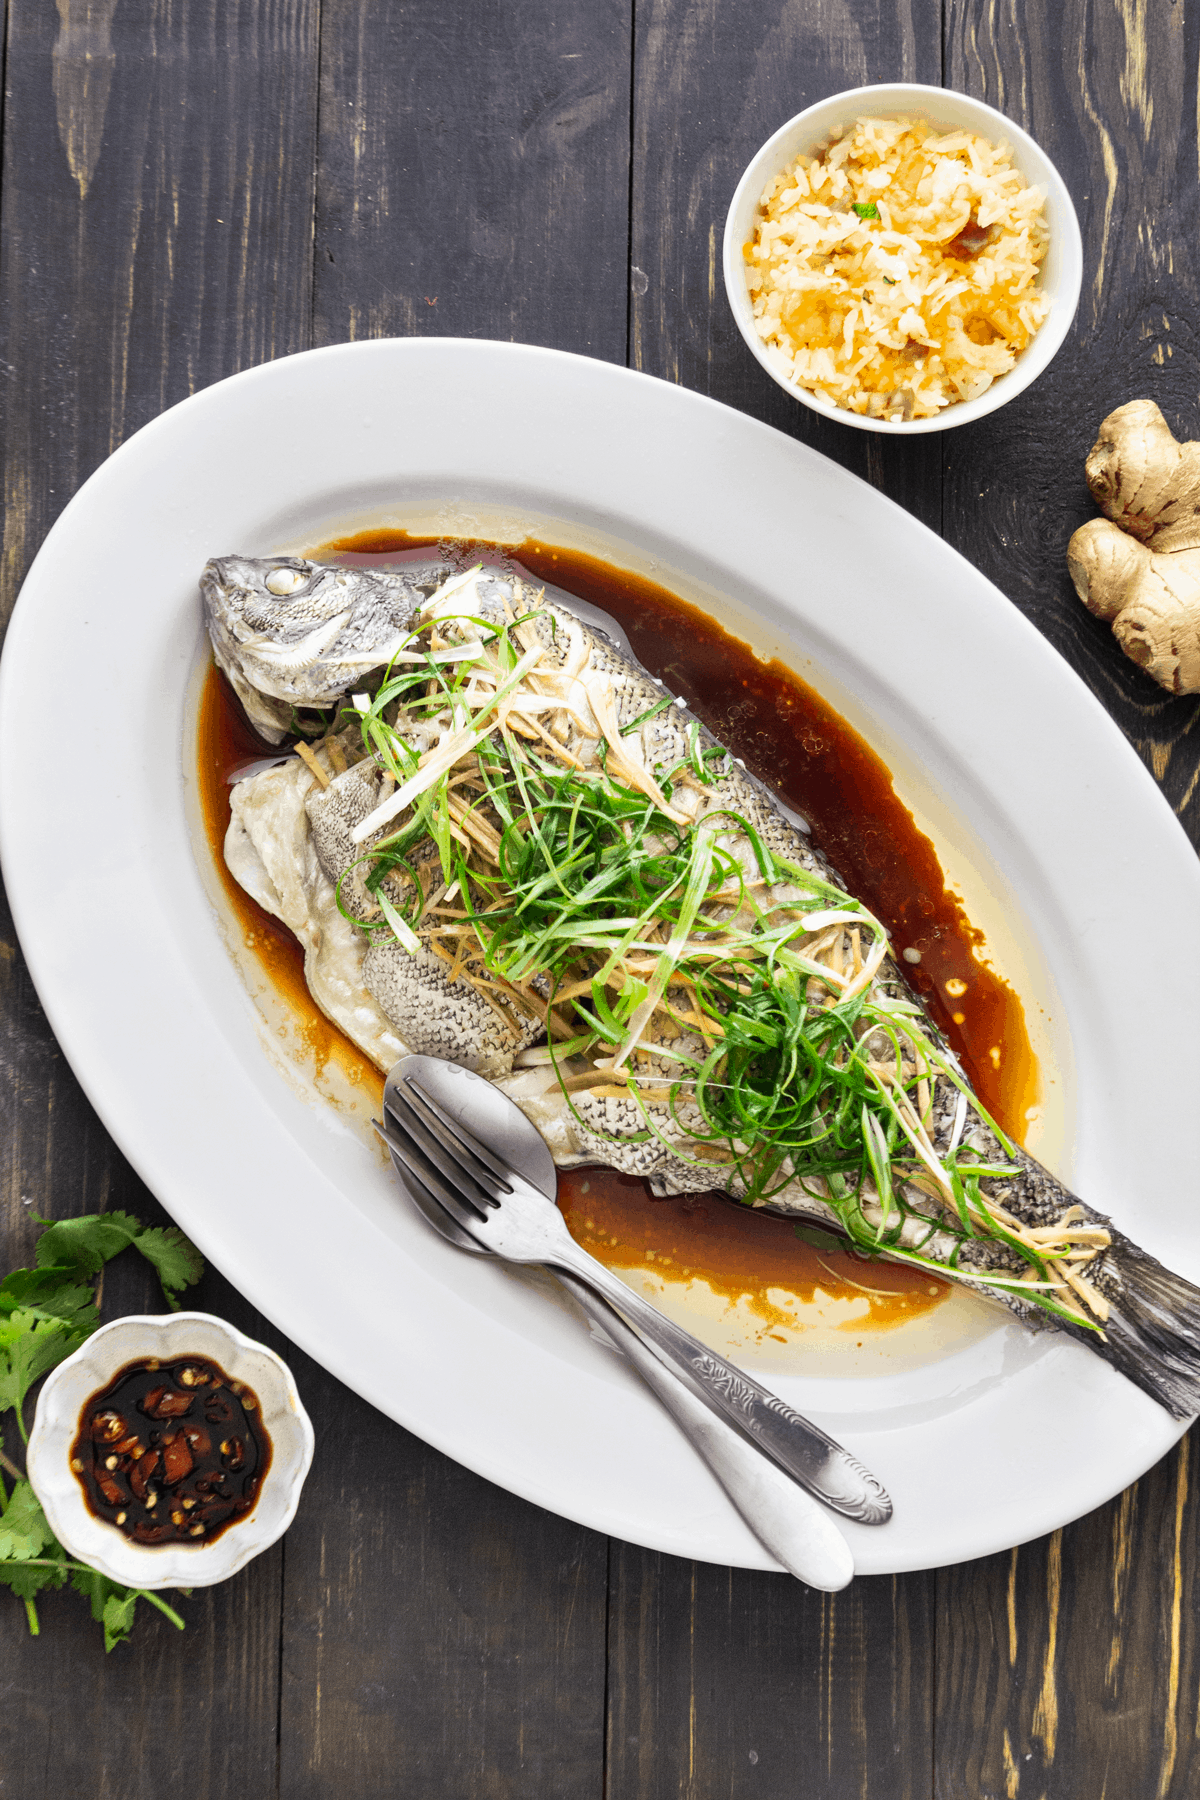 https://www.wokandkin.com/wp-content/uploads/2021/05/Steamed-Fish-with-Ginger-and-Shallots-saved-for-web-1200px.png